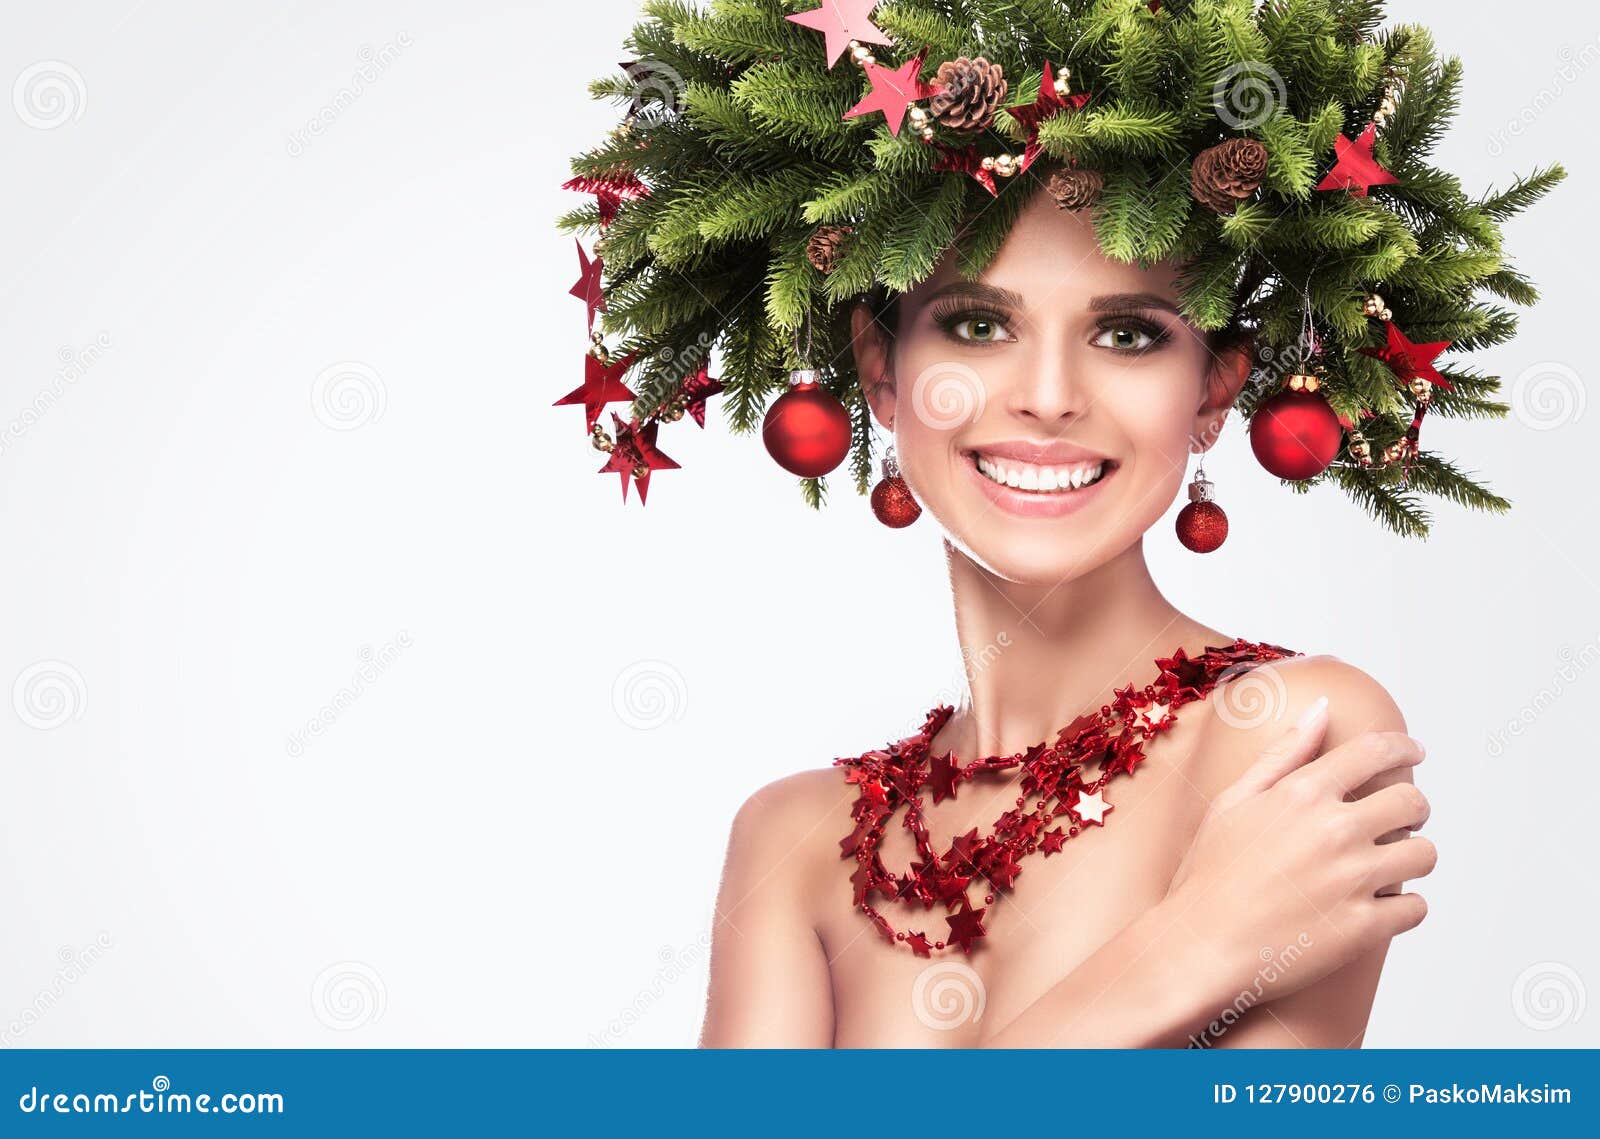 Smiling Beauty Fashion Model Girl With Fir Branches ...